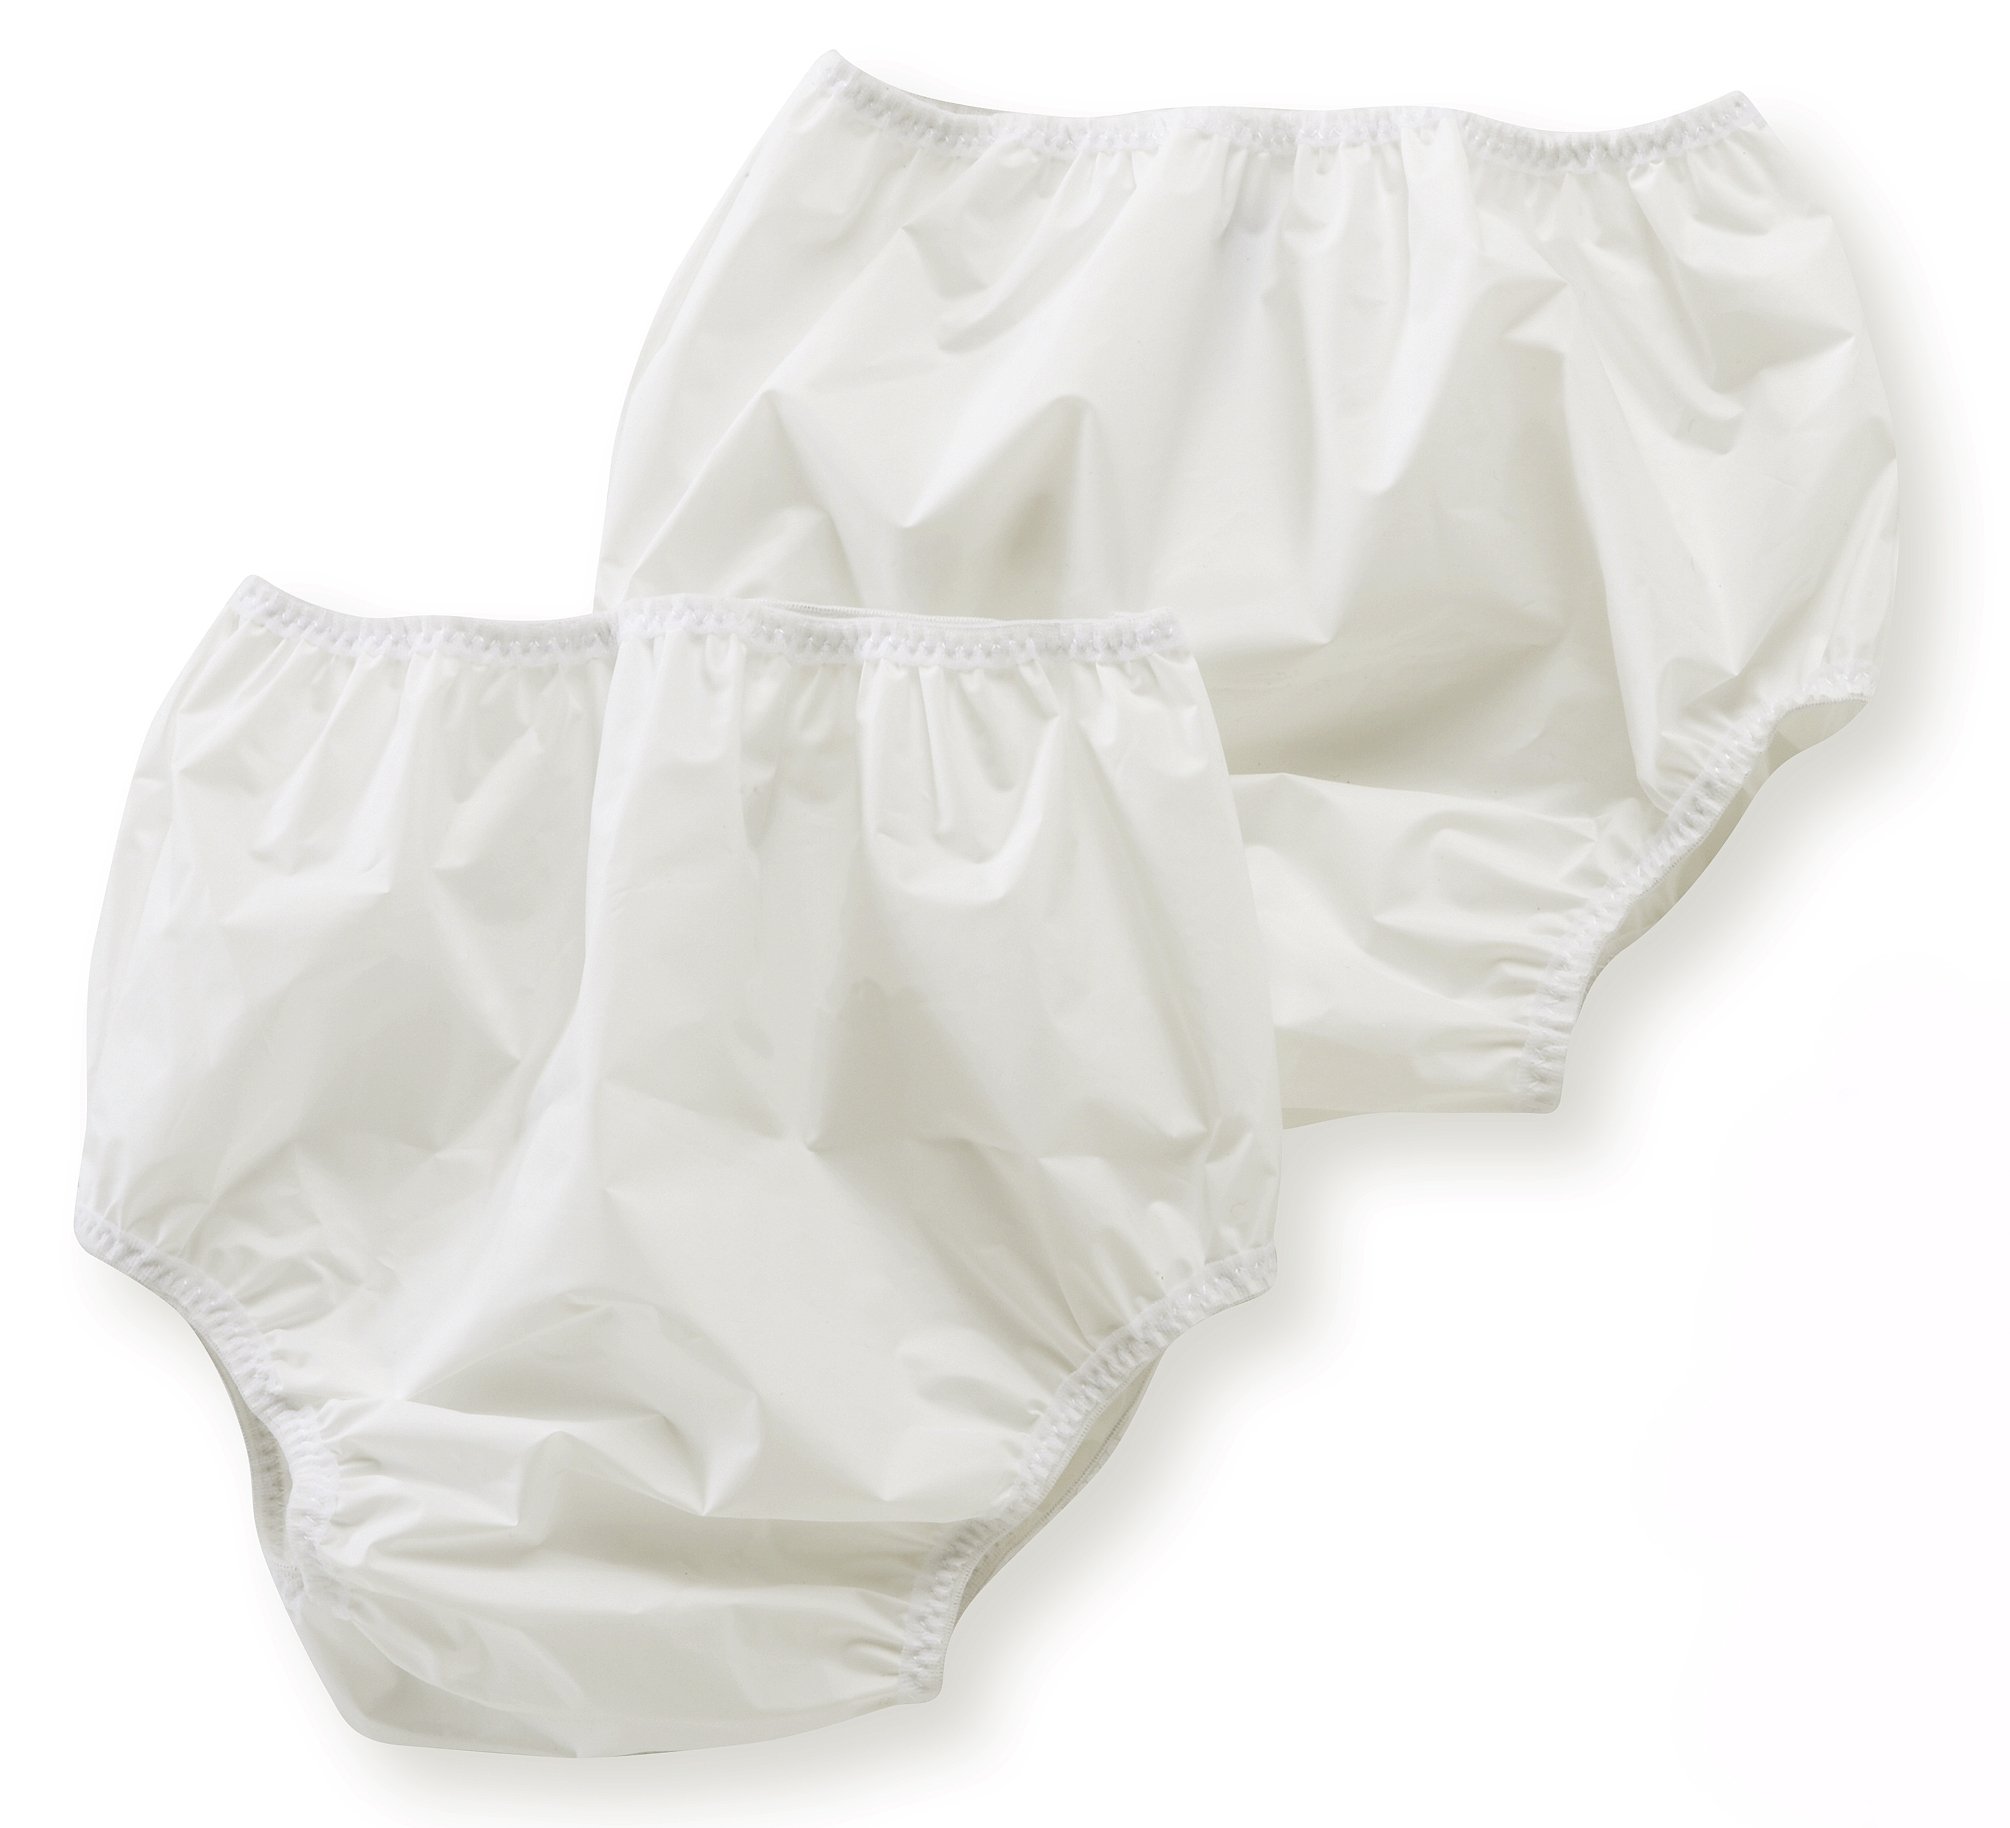 Gerber Brand 2 Pack White Waterproof PEVA Pant, 3T (Discontinued by Manufacturer)